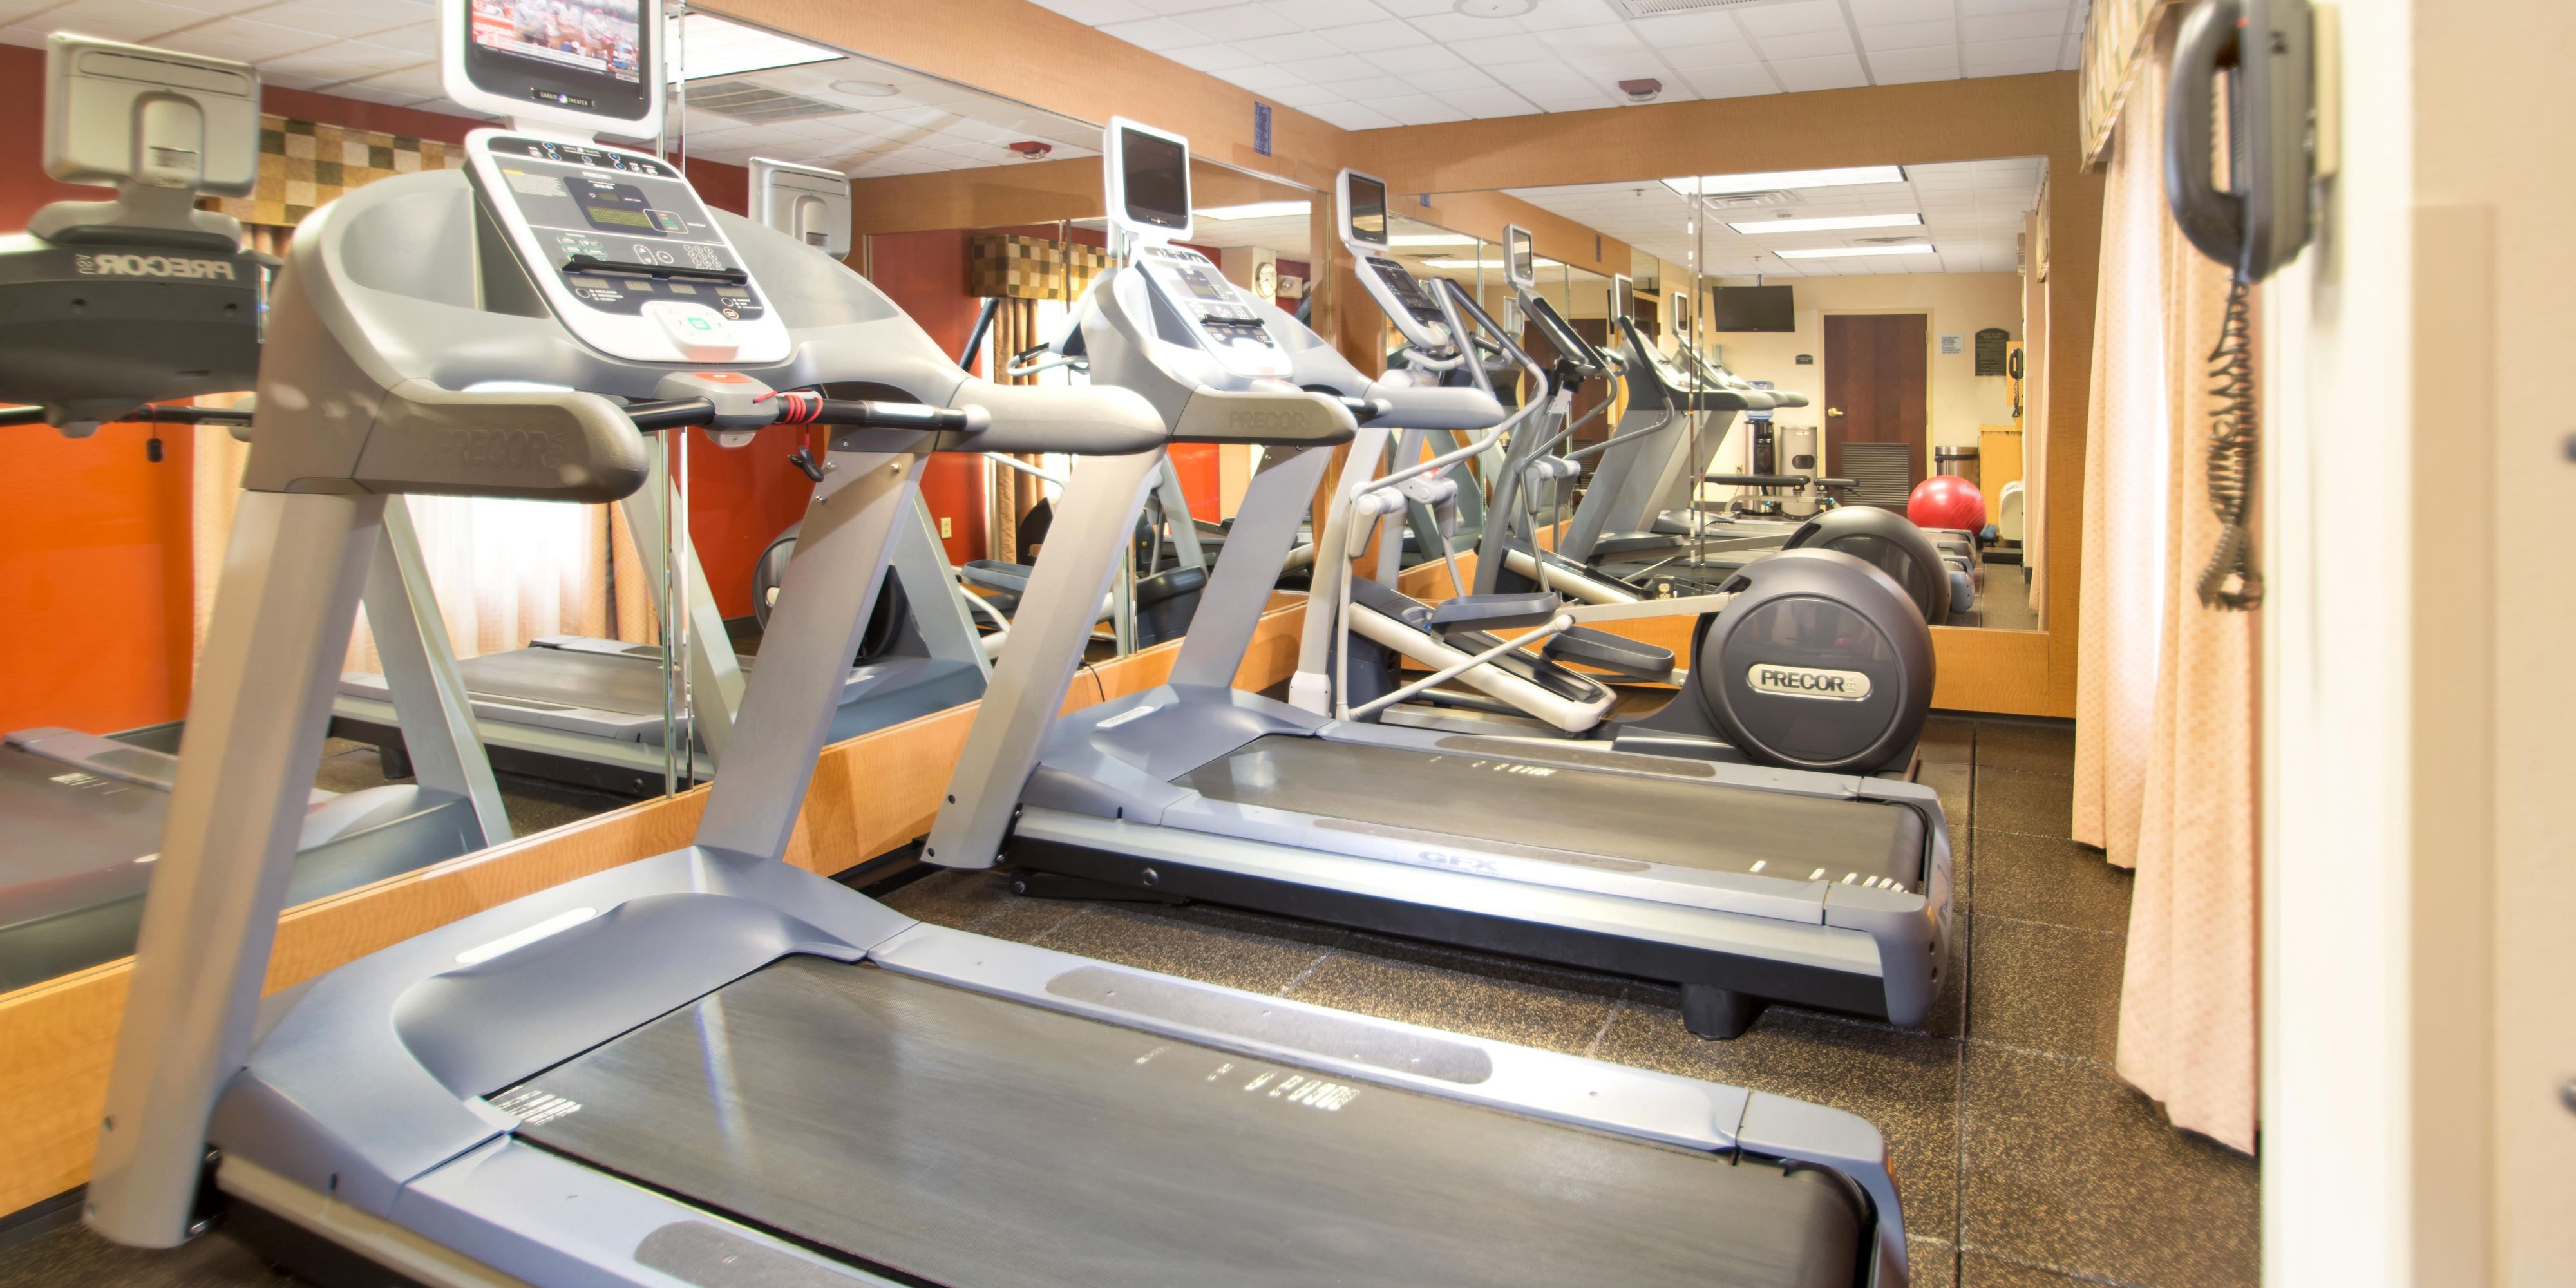 If you need some exercise to start your day or burn some calories, our renovated fitness room is here to serve you! With all Covid-19 restriction in place and enhancing our safety and cleaning policies you don’t have to worry about your well being. We have got you covered!